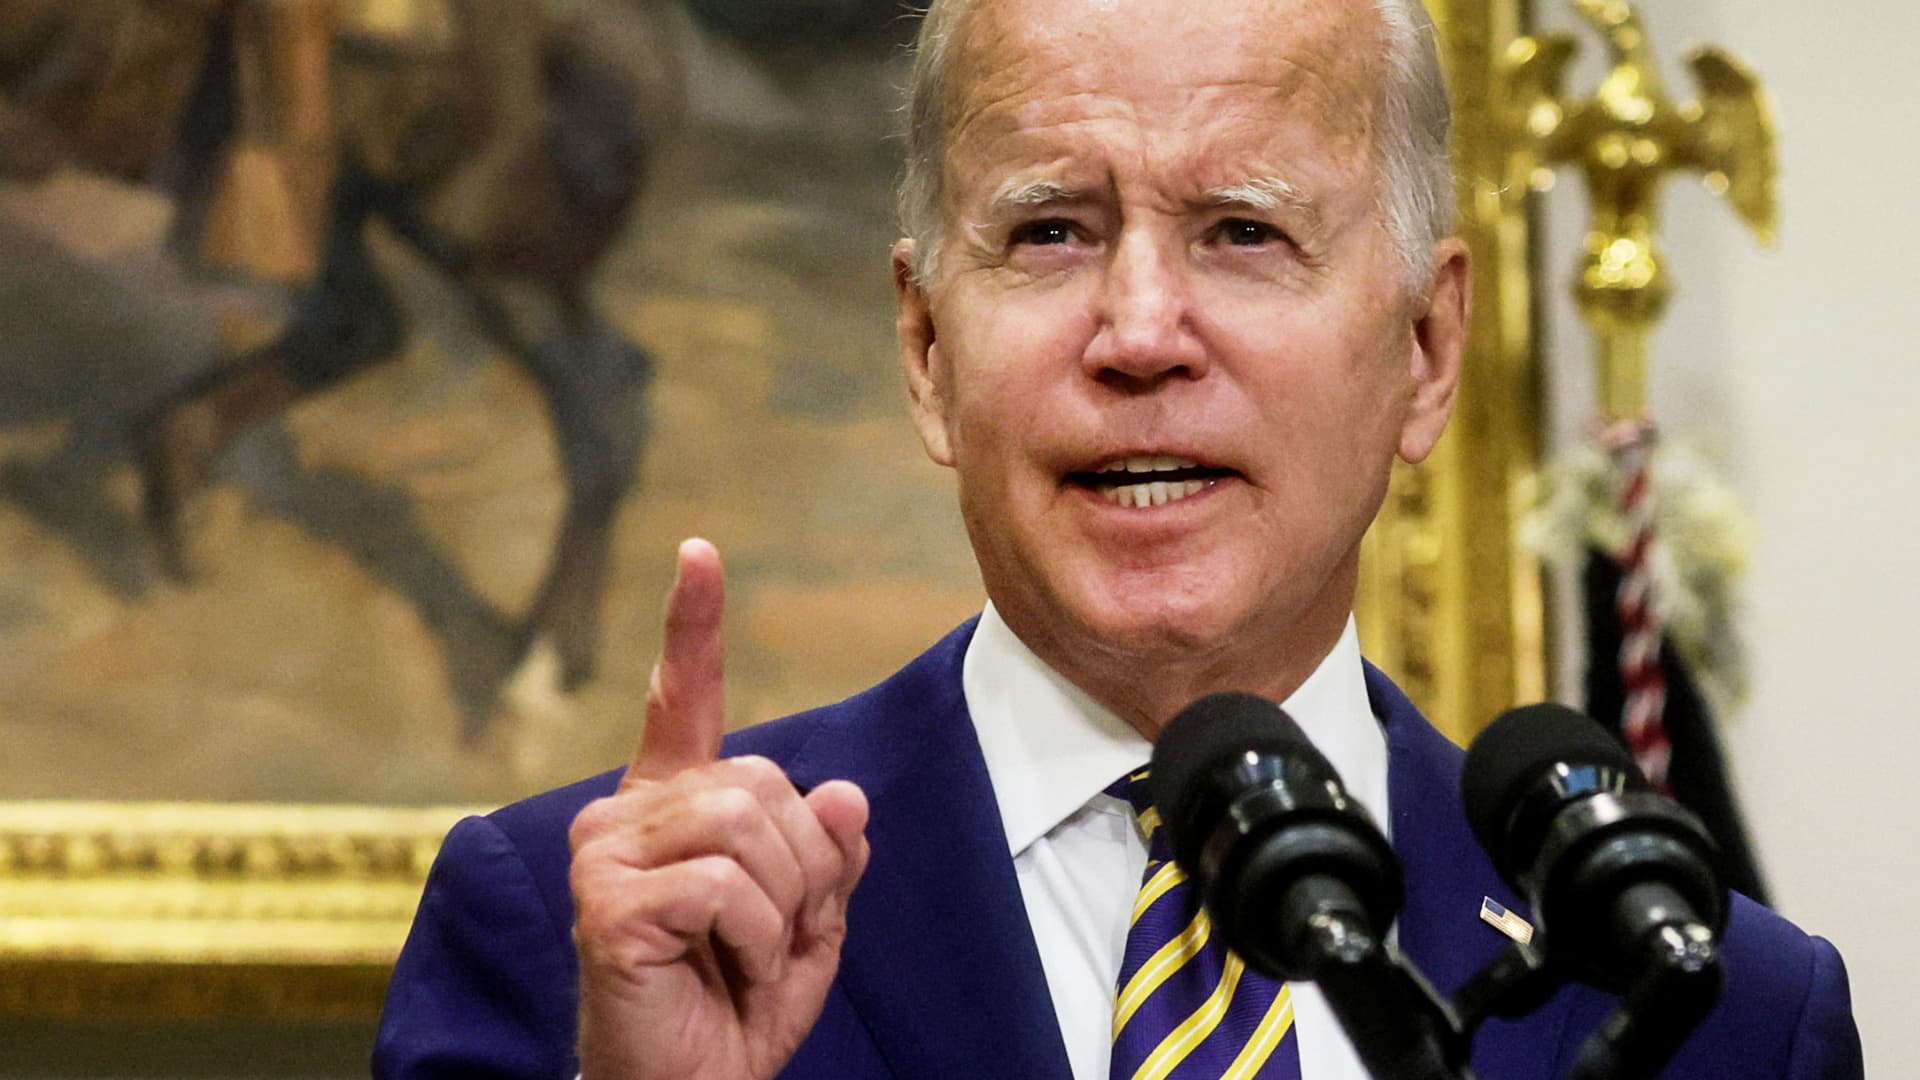 813,000 borrowers to get email from President Joe Biden on student loan forgiveness, White House says